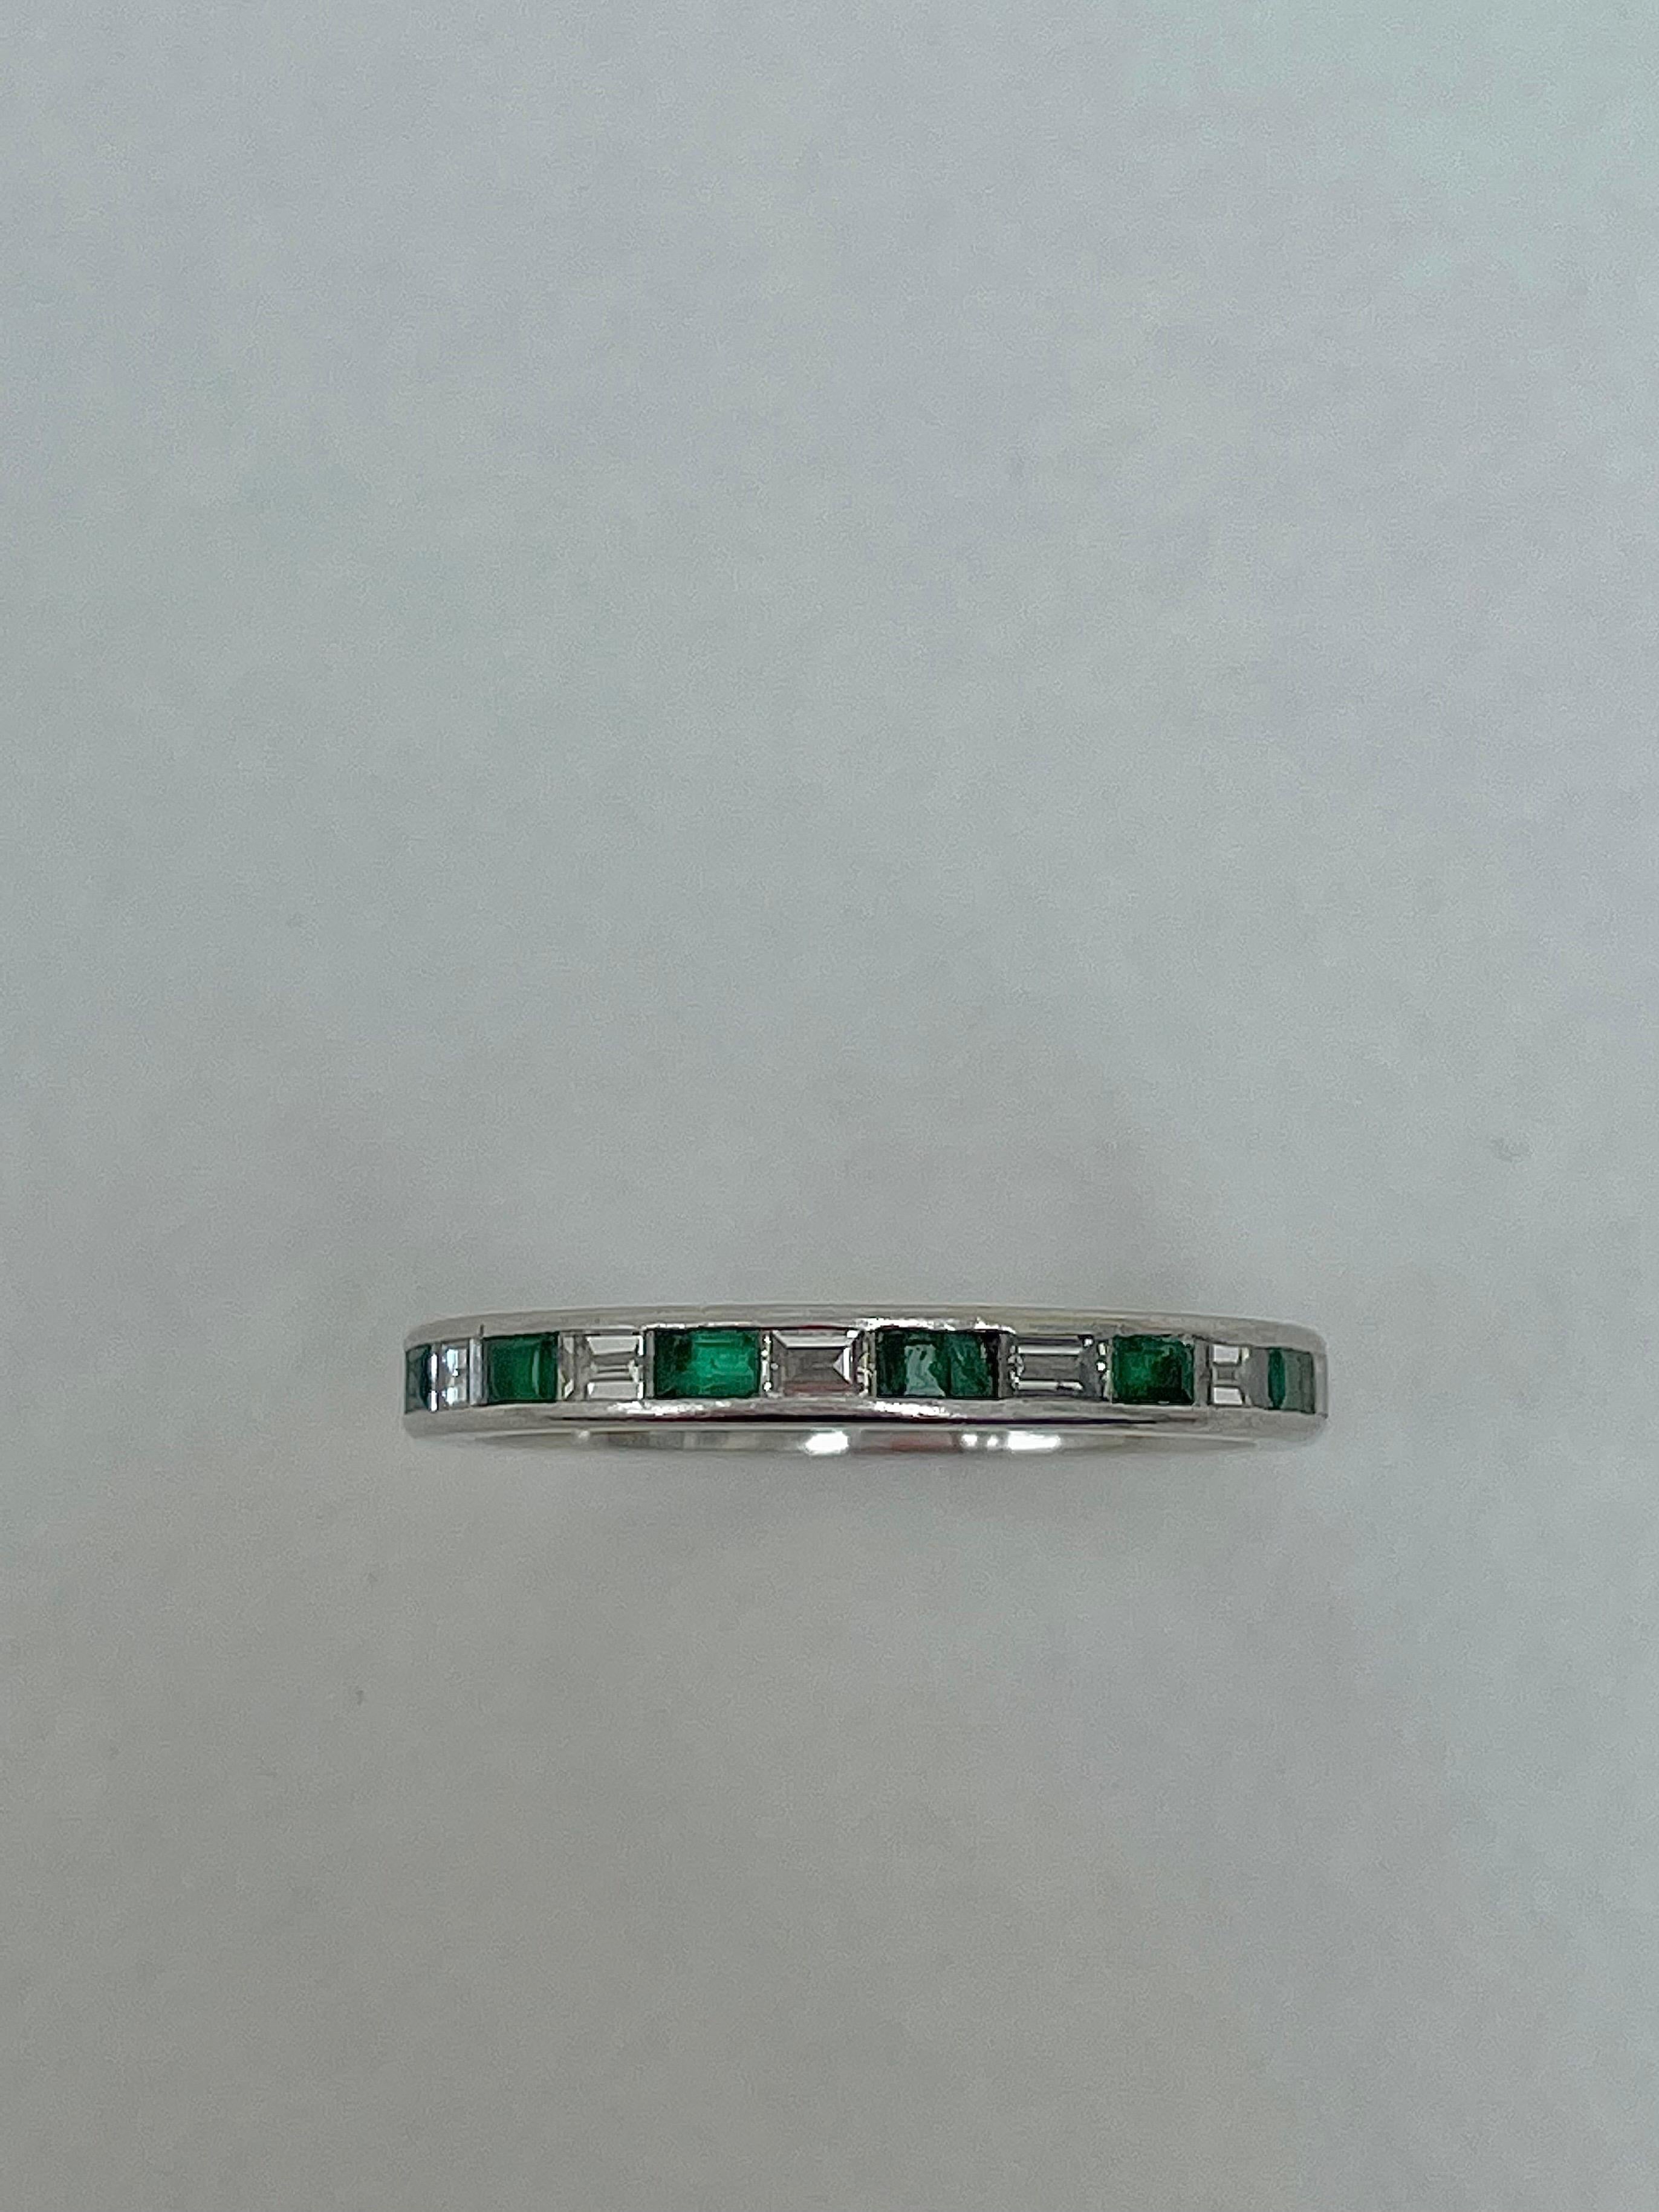 Antique Platinum Emerald and Diamond Full Eternity Band Ring

delightful full eternity band ring, simple but beautiful! 

The item comes without the box in the photos but will be presented in a  gift box

Measurements: weight 2.52g, size UK N,